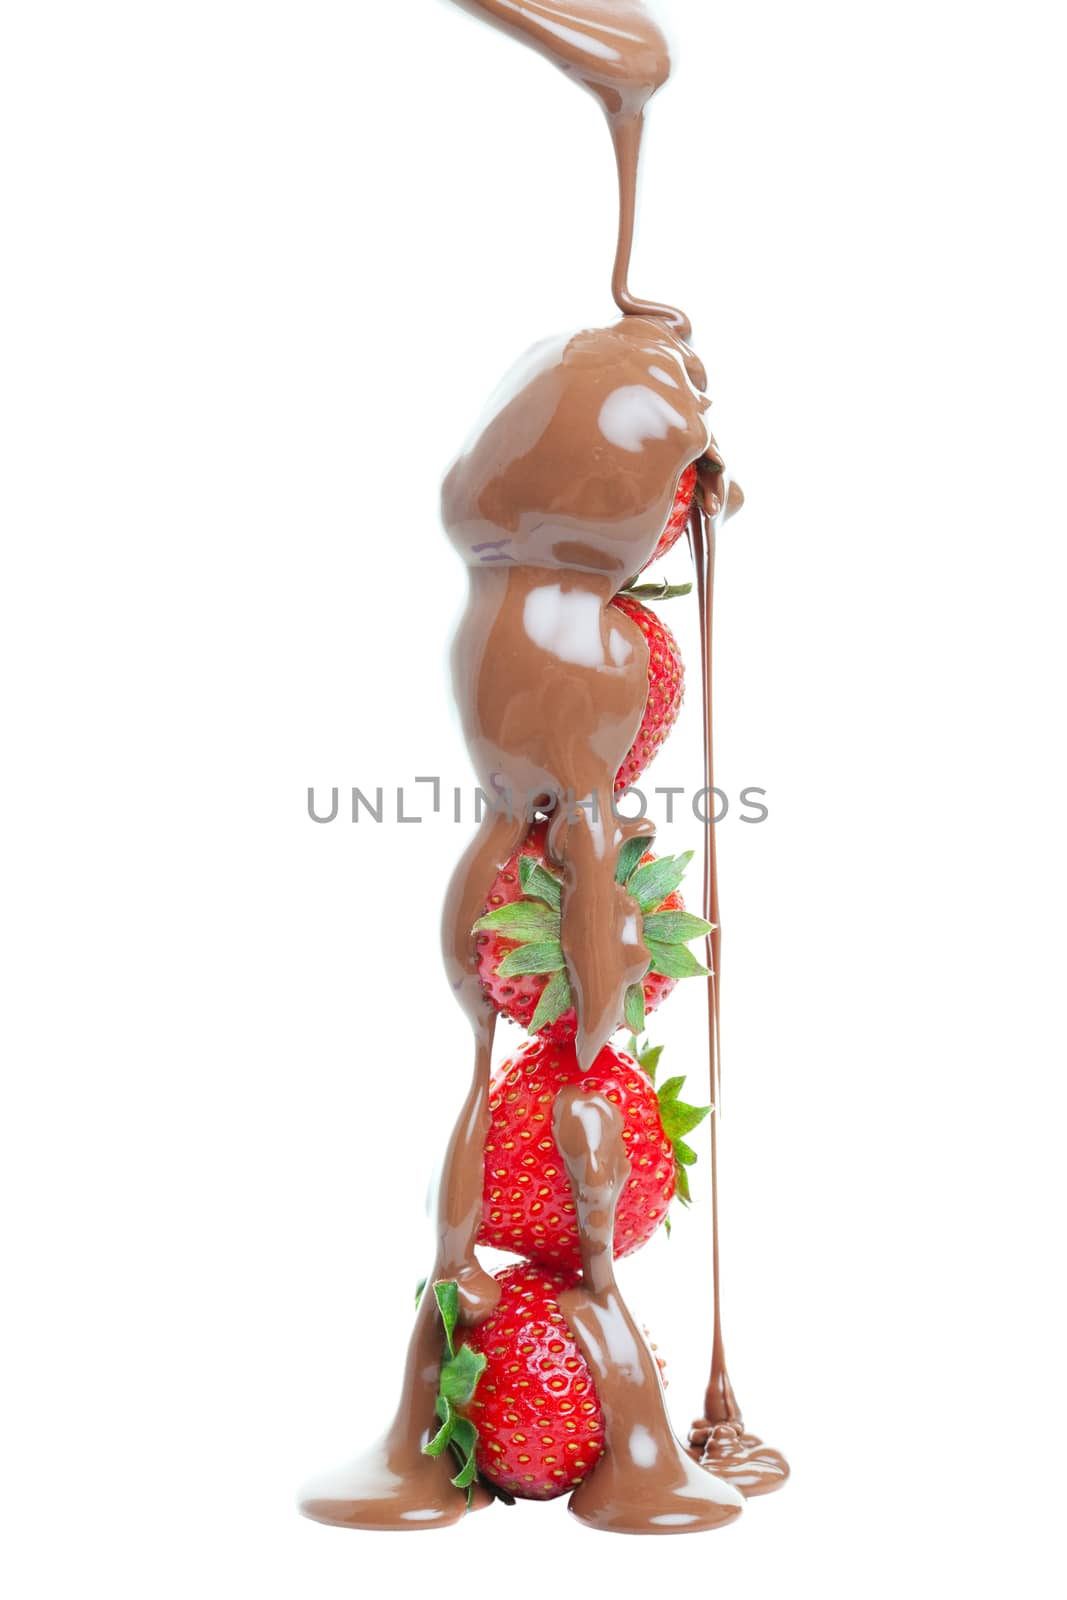 Smooth, warm, milk chocolate being drizzled over a stack of strawberries.  A very decadent dessert.  Shot on white background.